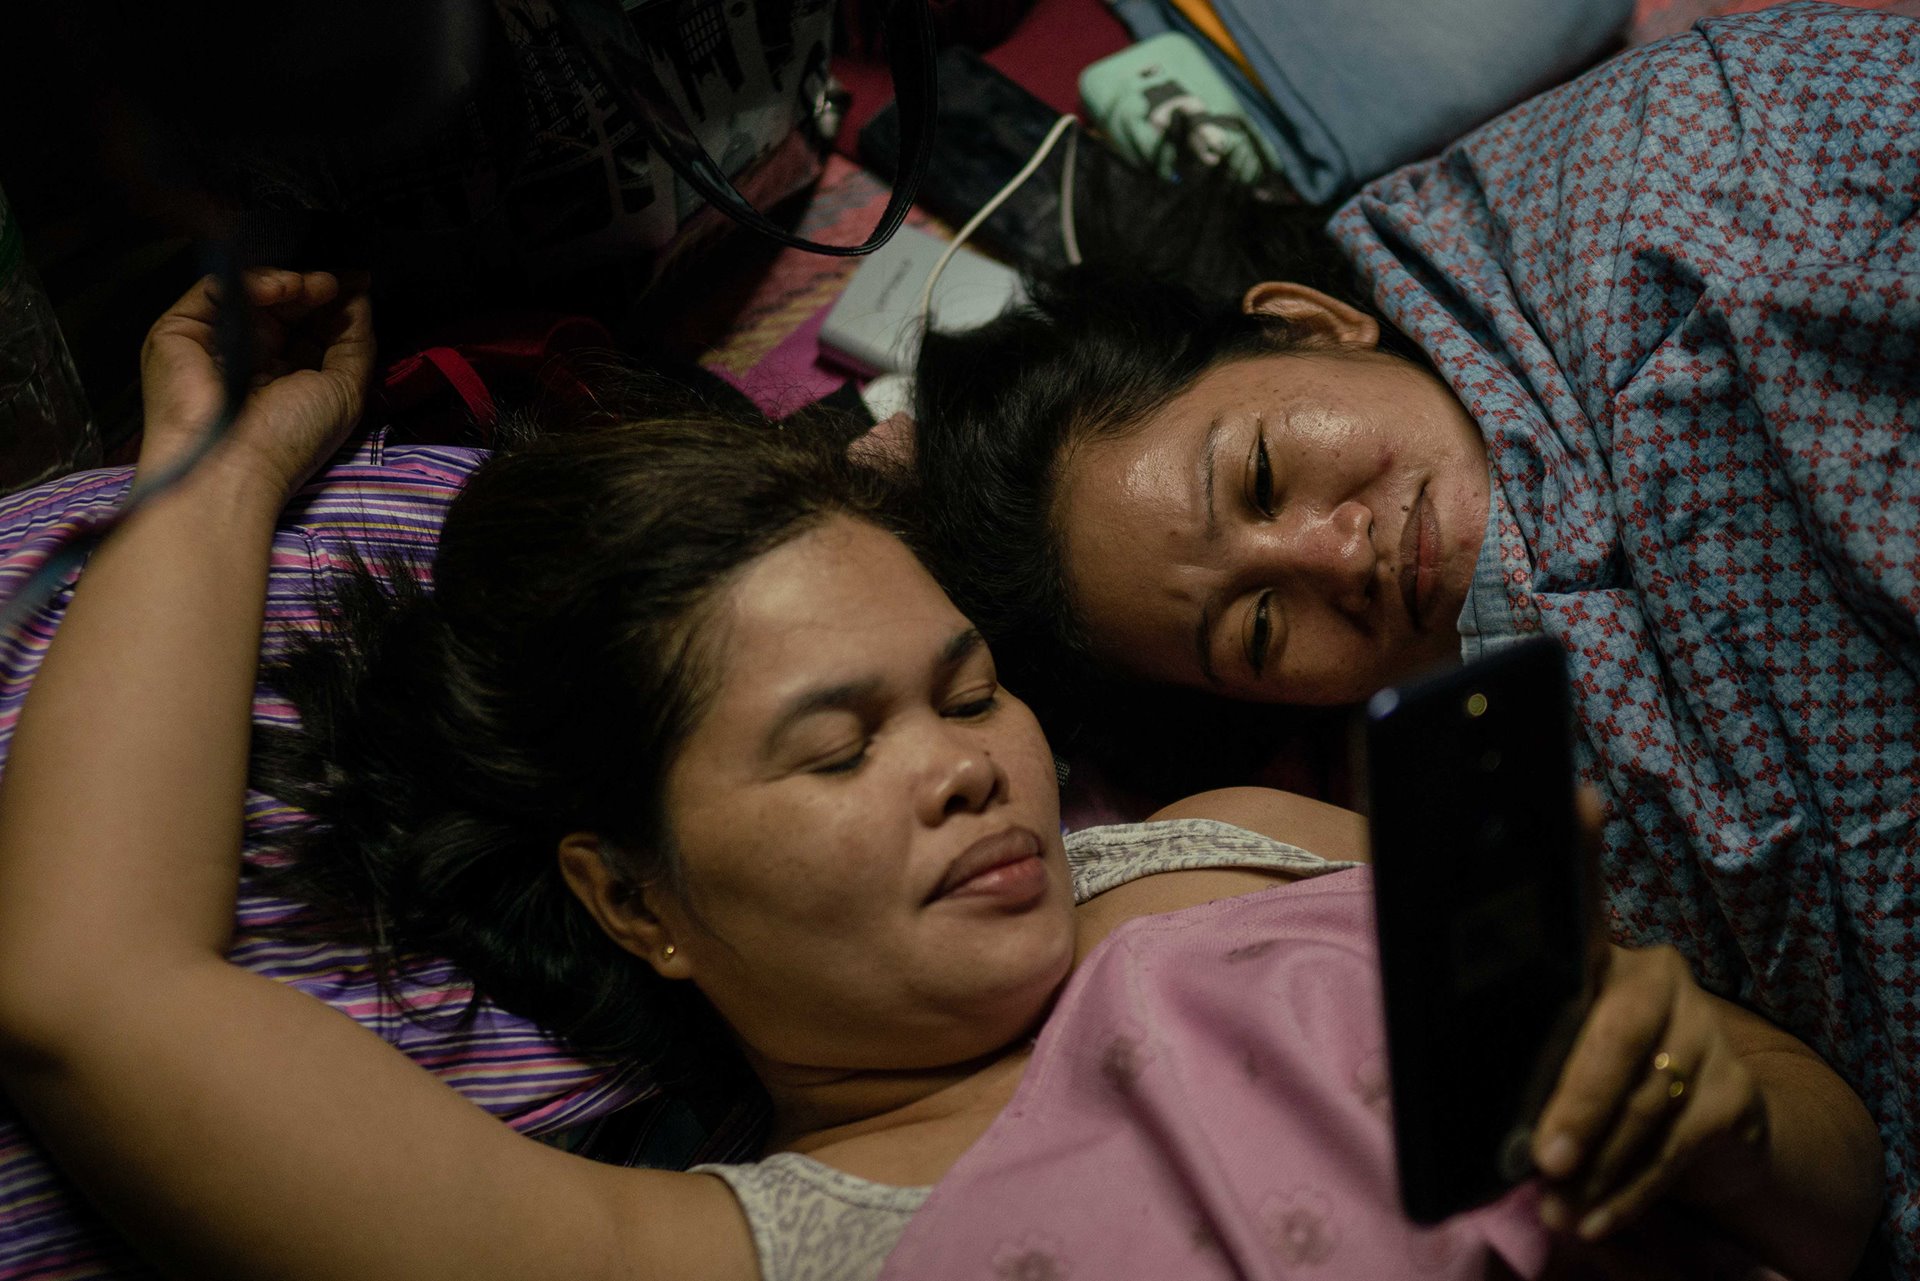 Marilyn Malimban and Jenny Tiaga watch a video on Marilyn&#39;s phone during a hike and camping trip in &nbsp;Mount Banahaw in Quezon Province, the Philippines. Both lost their husbands to the war on drugs and had to work away from home to support their children.The hike was organized by Paghilom (Healing), a program started in 2016 by former drug user Father Flaviano Villanueva for families of victims of the war on drugs, providing them with support and counseling.&nbsp;